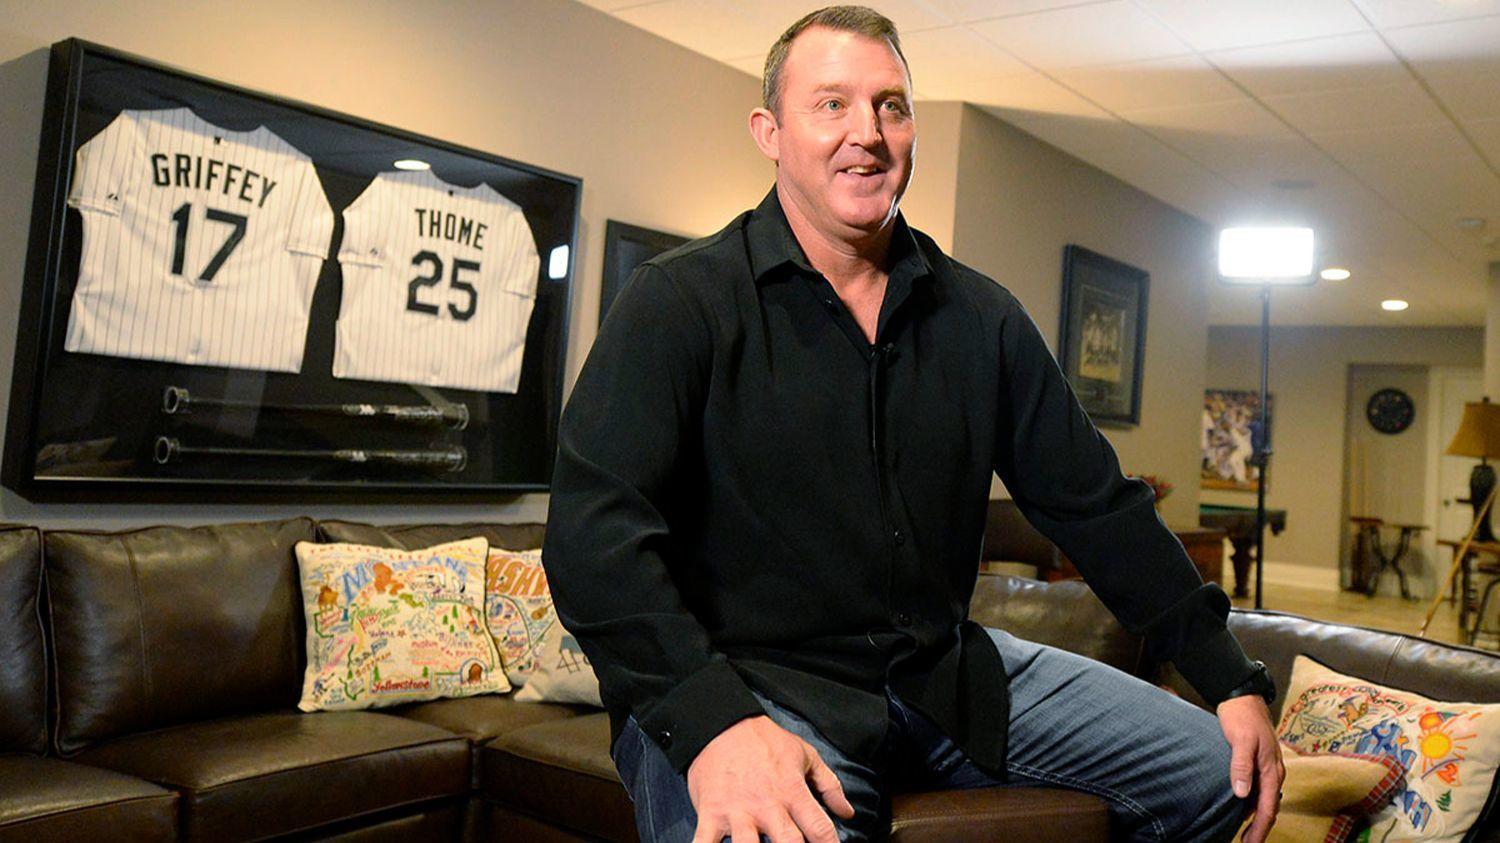 Jim Thome credits Peoria roots for path to Hall of Fame